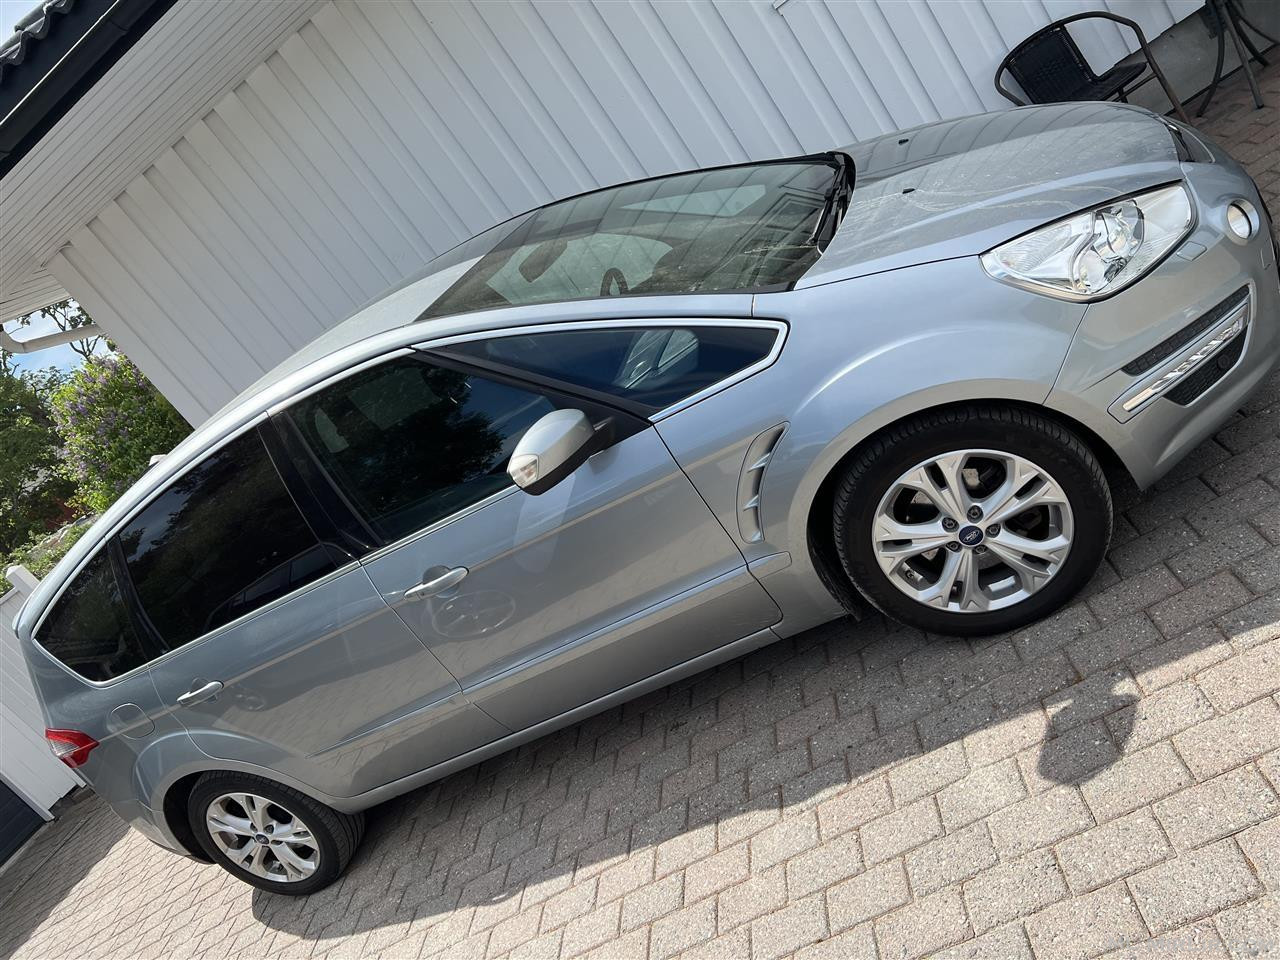 Ford S Max 2.0 7 ulse